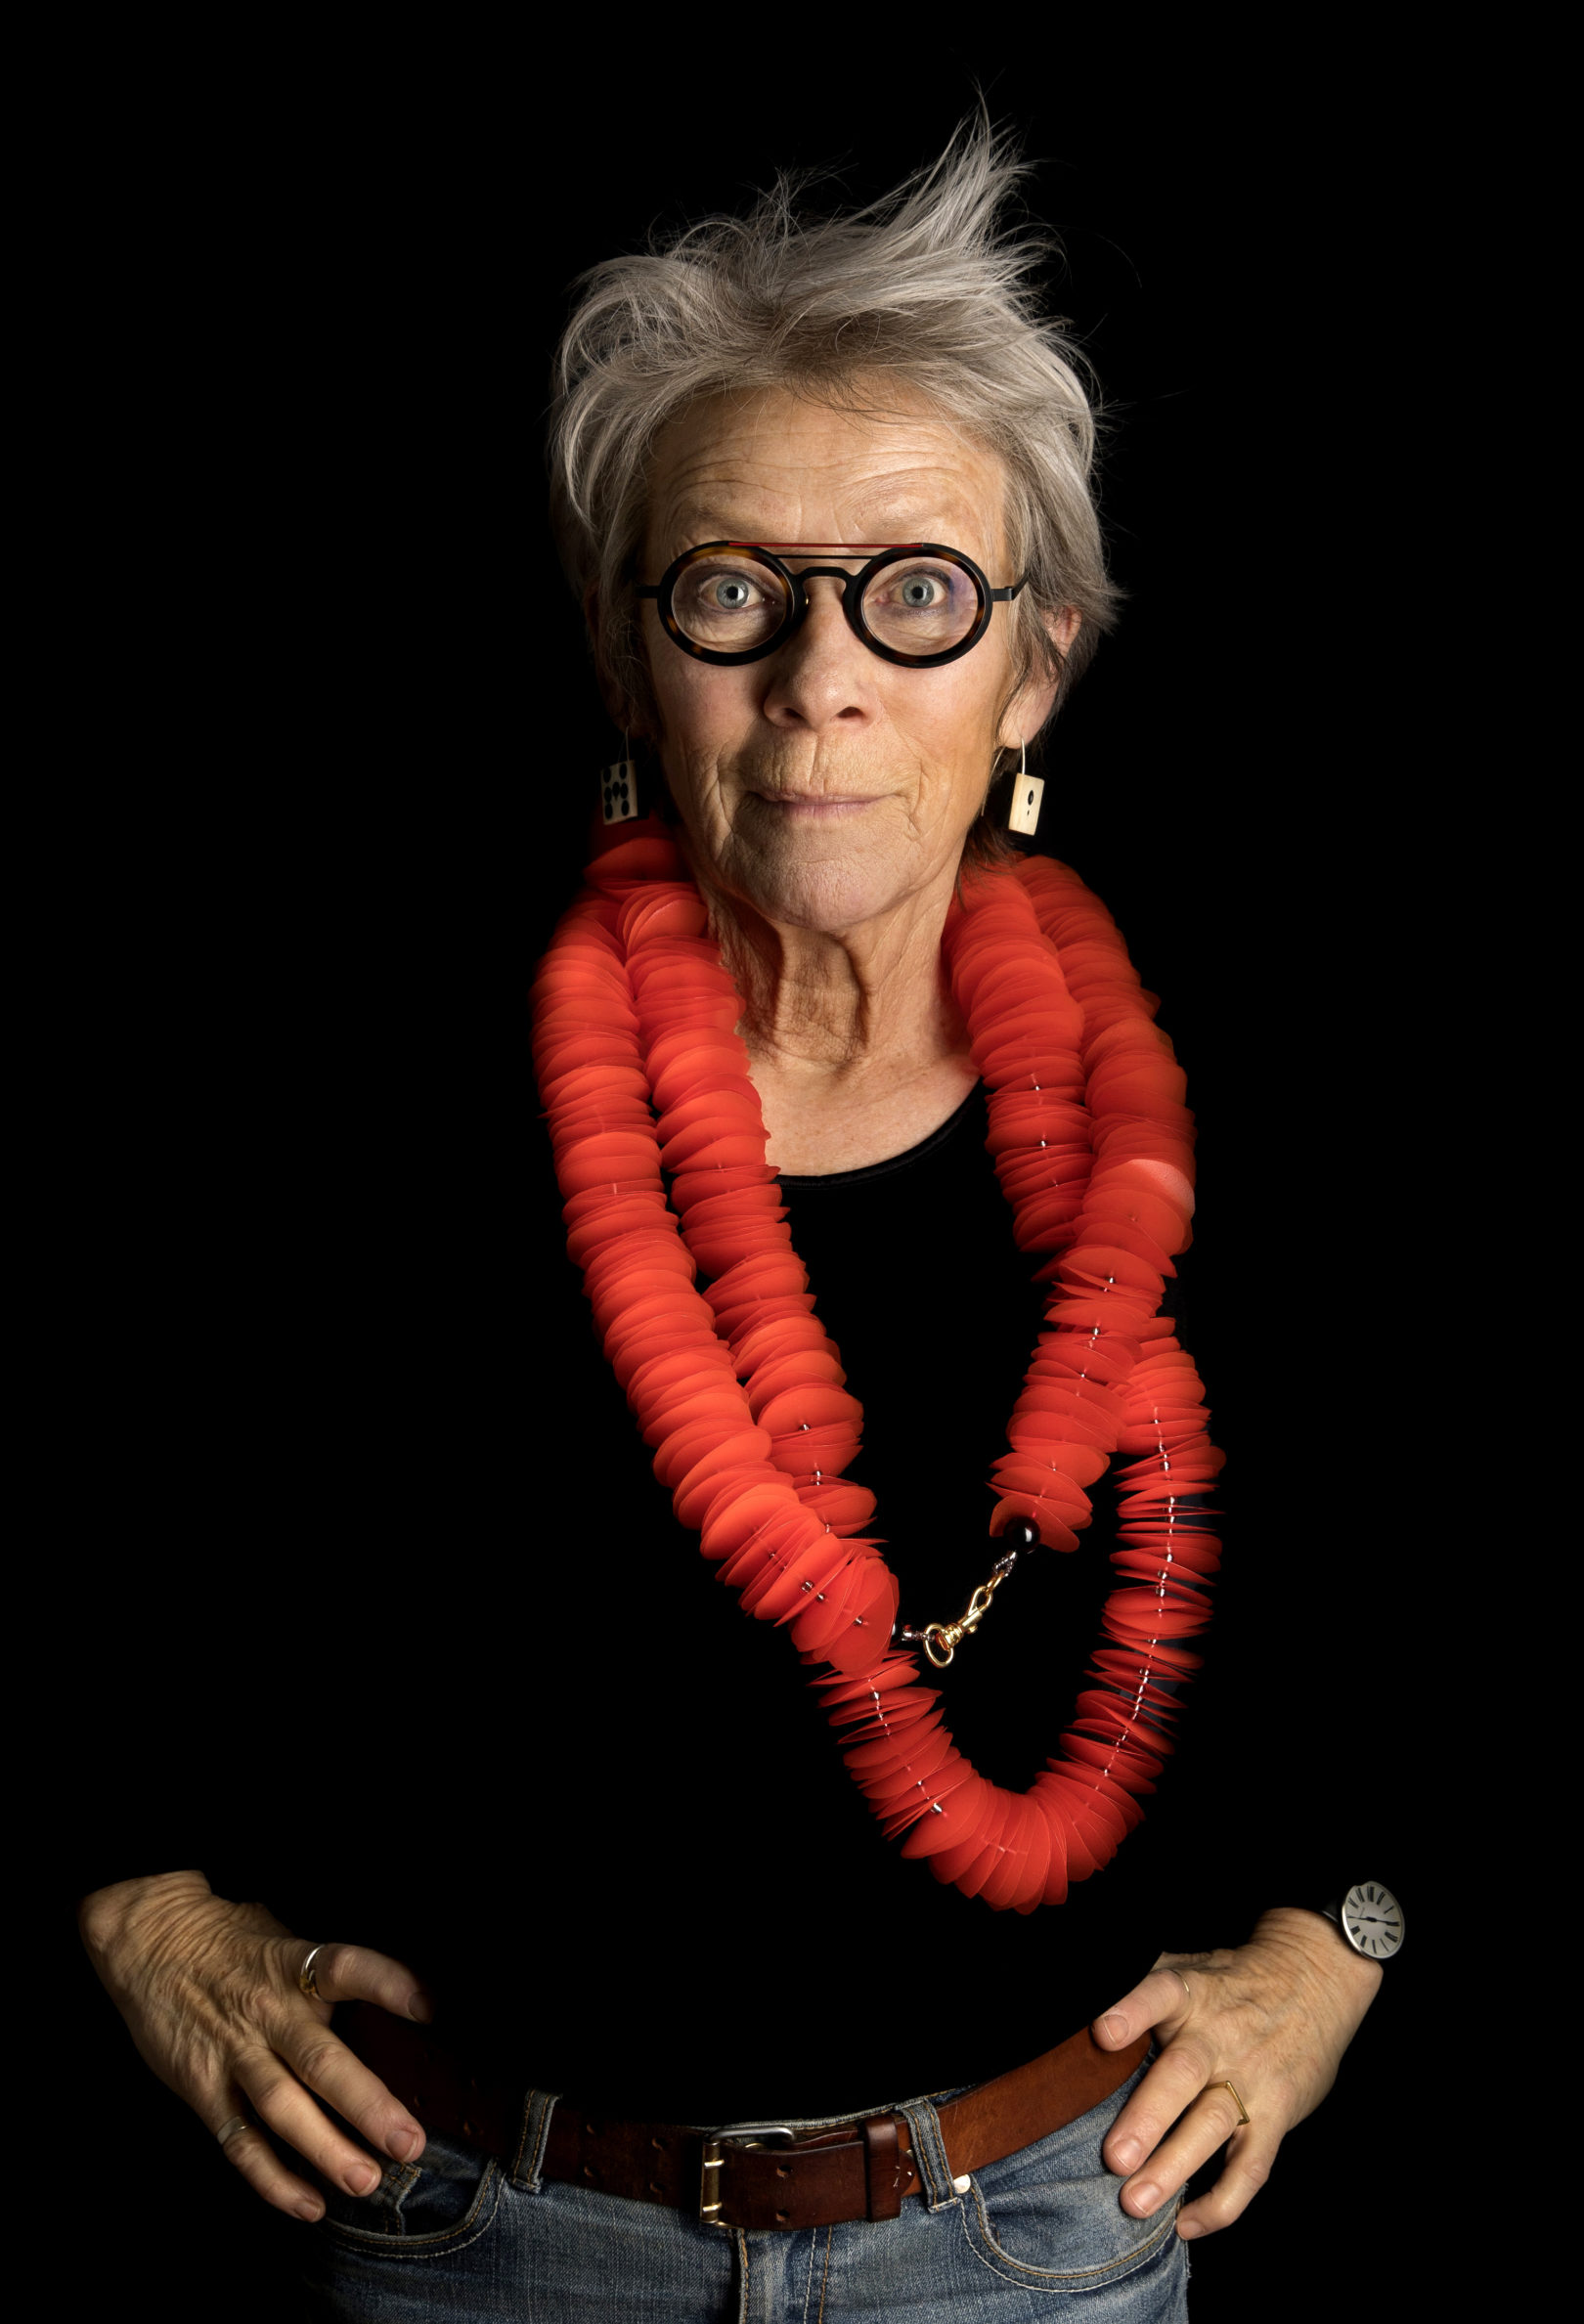 Kirsten Sonne photographed against a black background wearing a large red necklace made from many plastic disks.